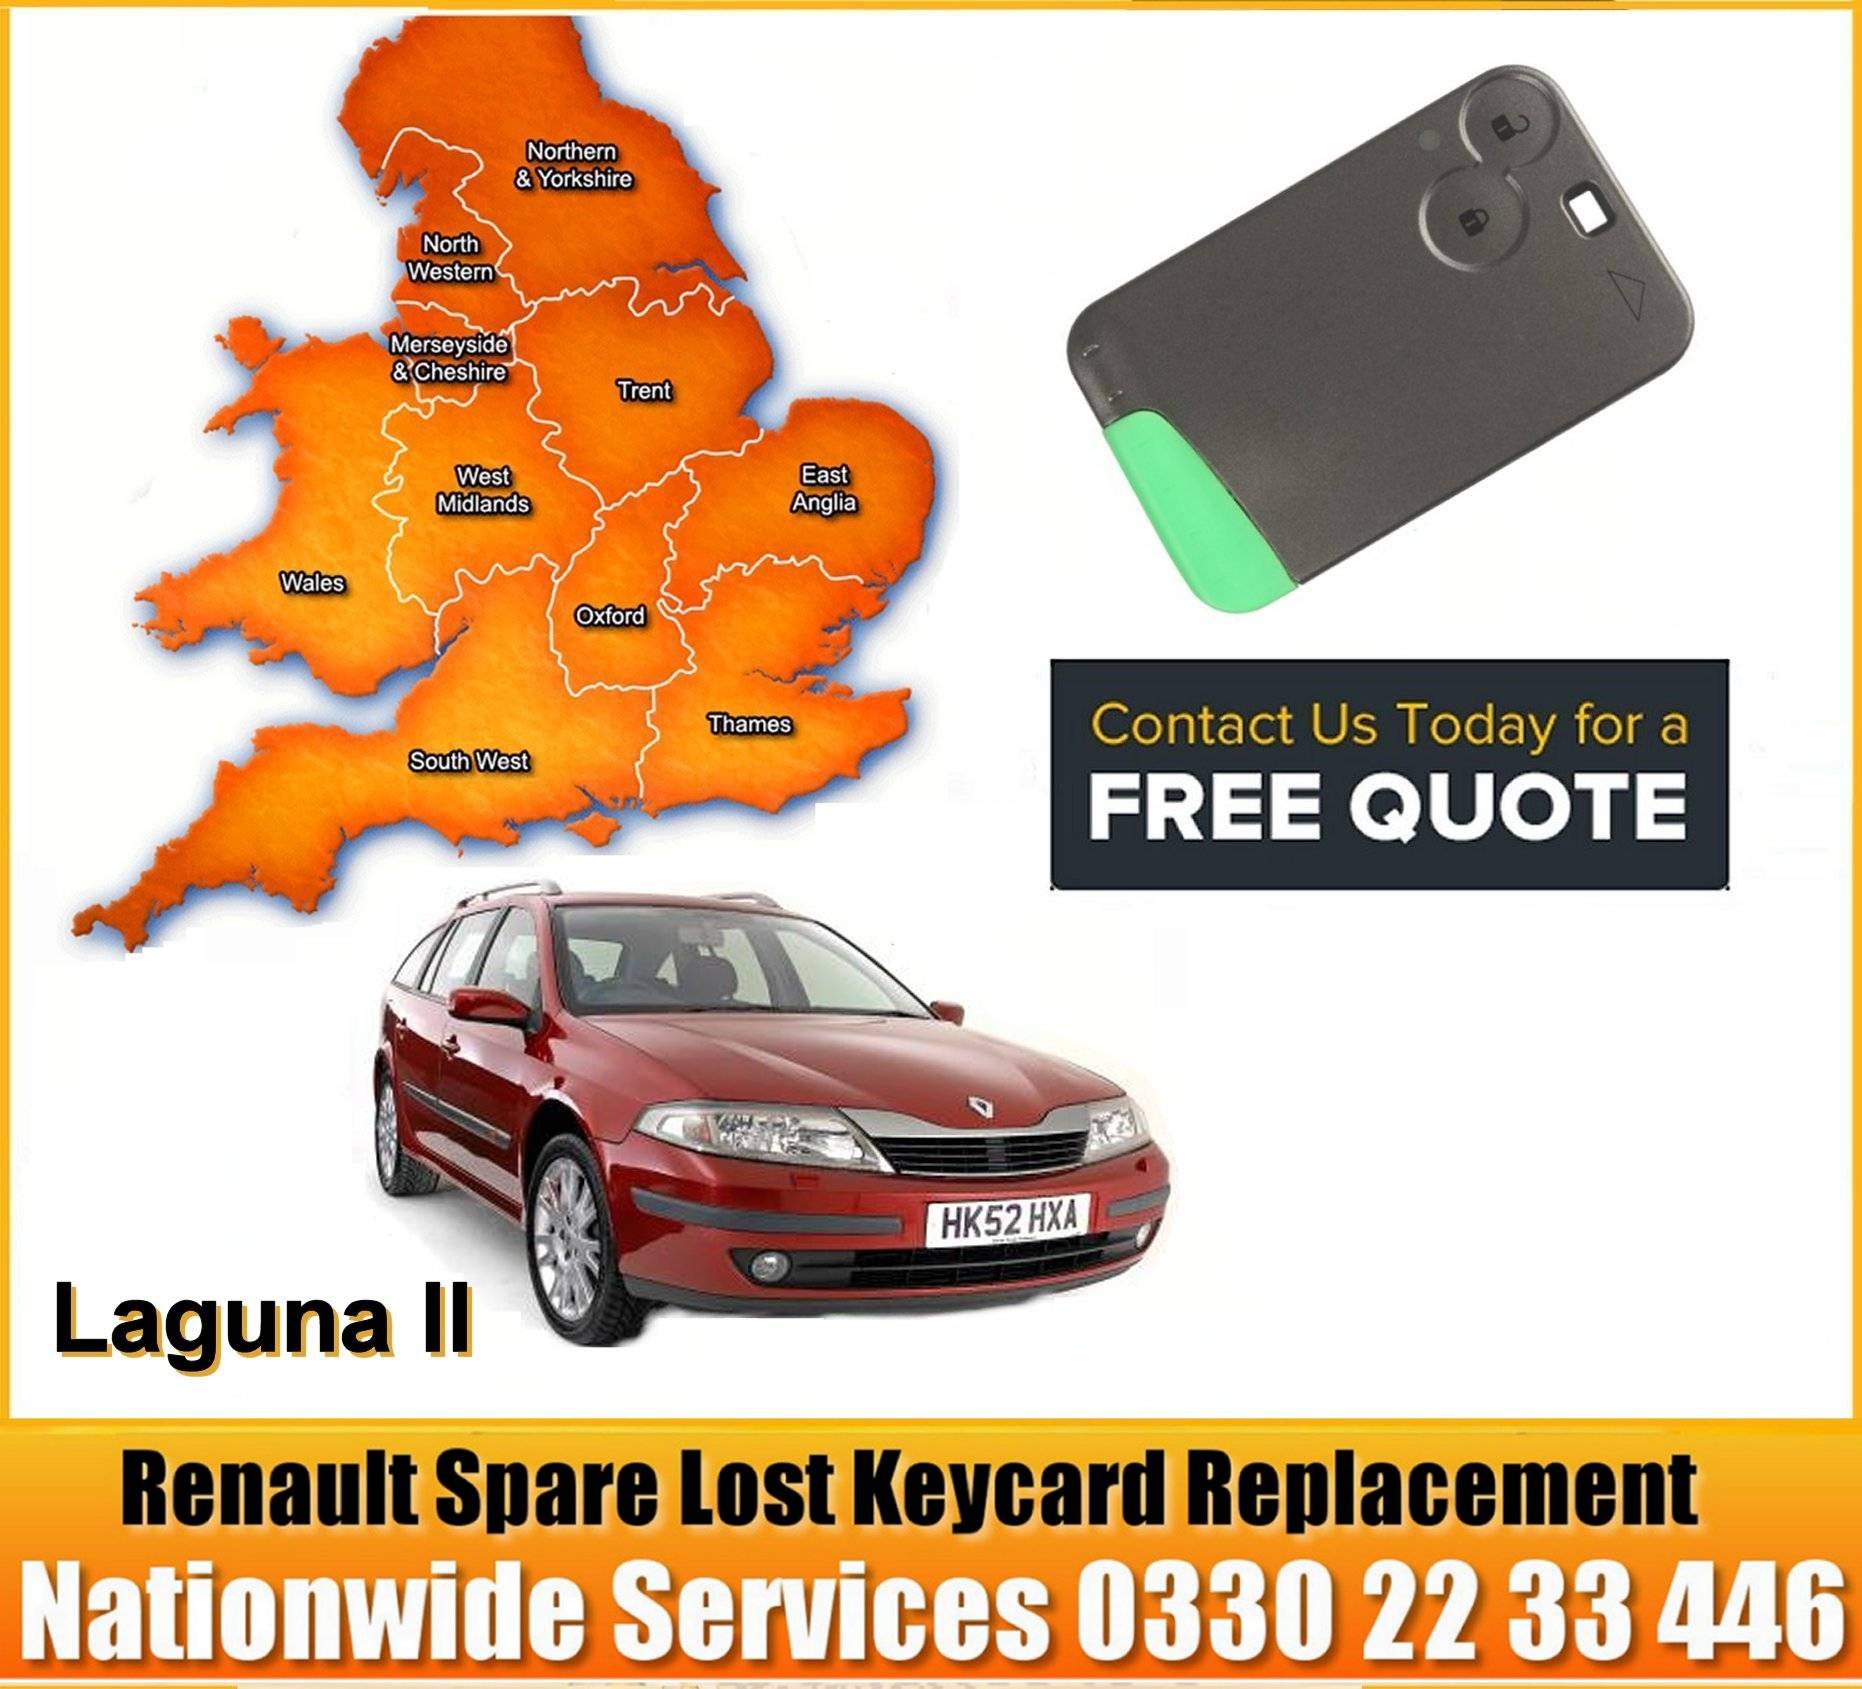 2002 Replacement 2 Button Remote Key Card for Renault Laguna II